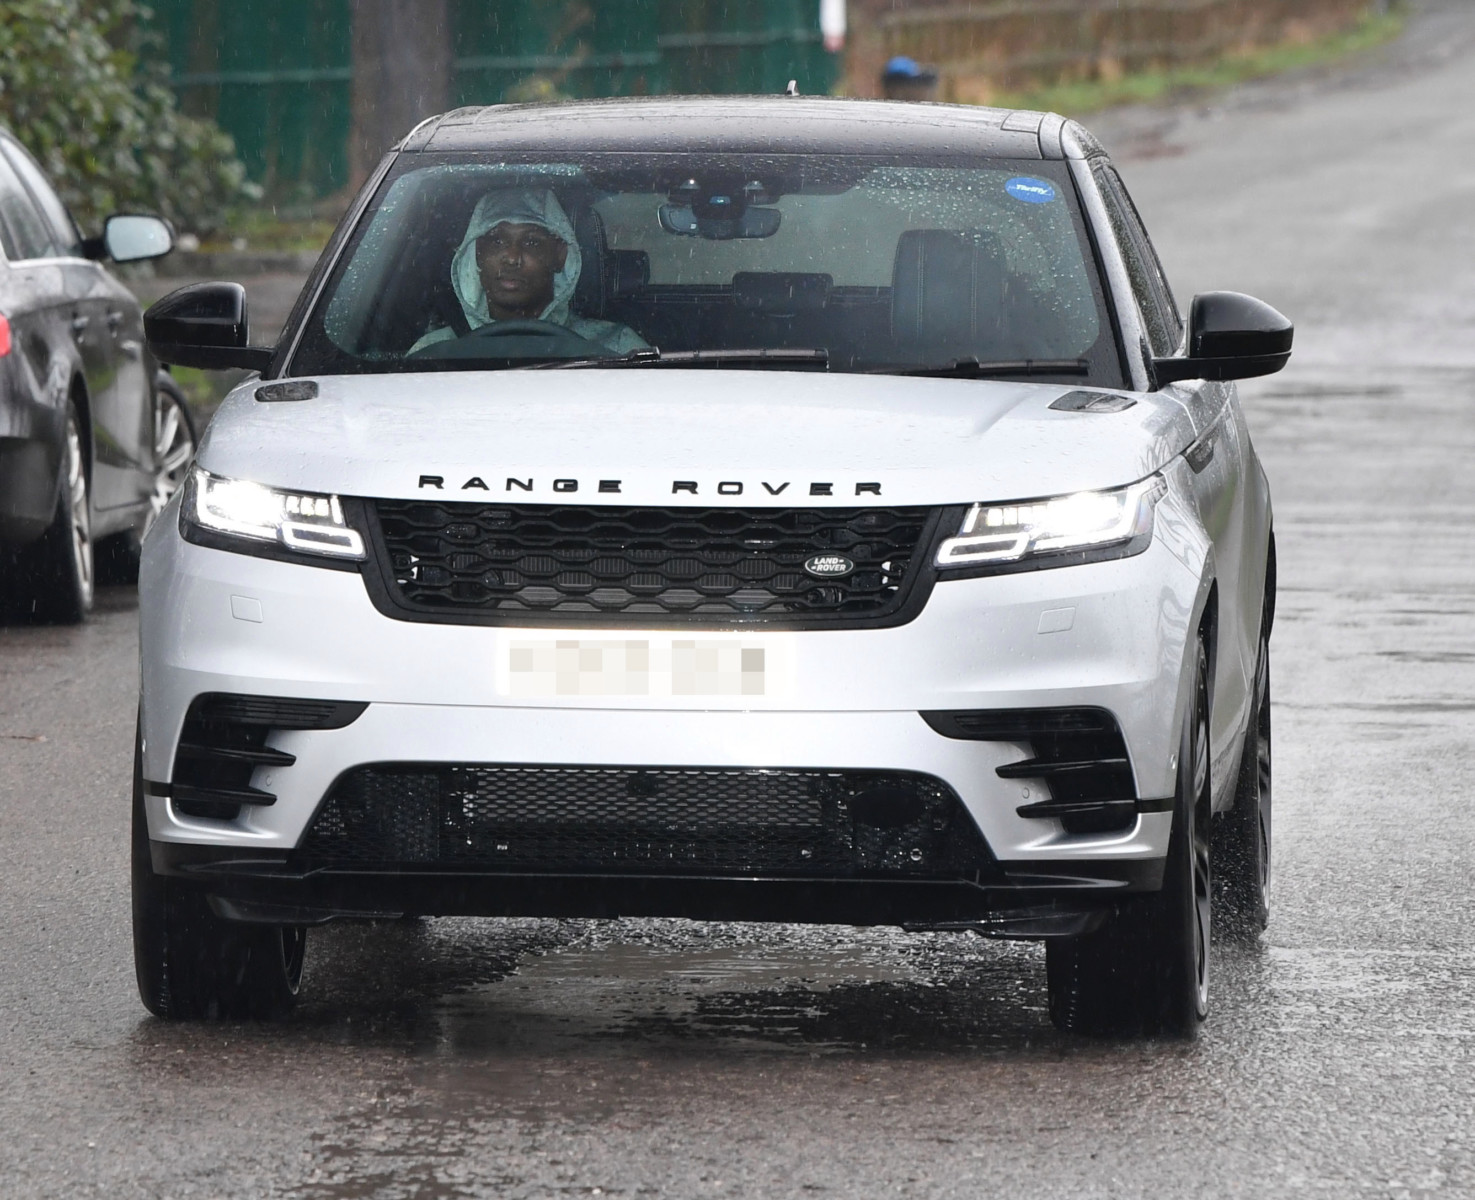 , Sir Alex Ferguson drives into Man Utd training with wife Cathy as Solskjaer and Co report early ahead of Everton clash